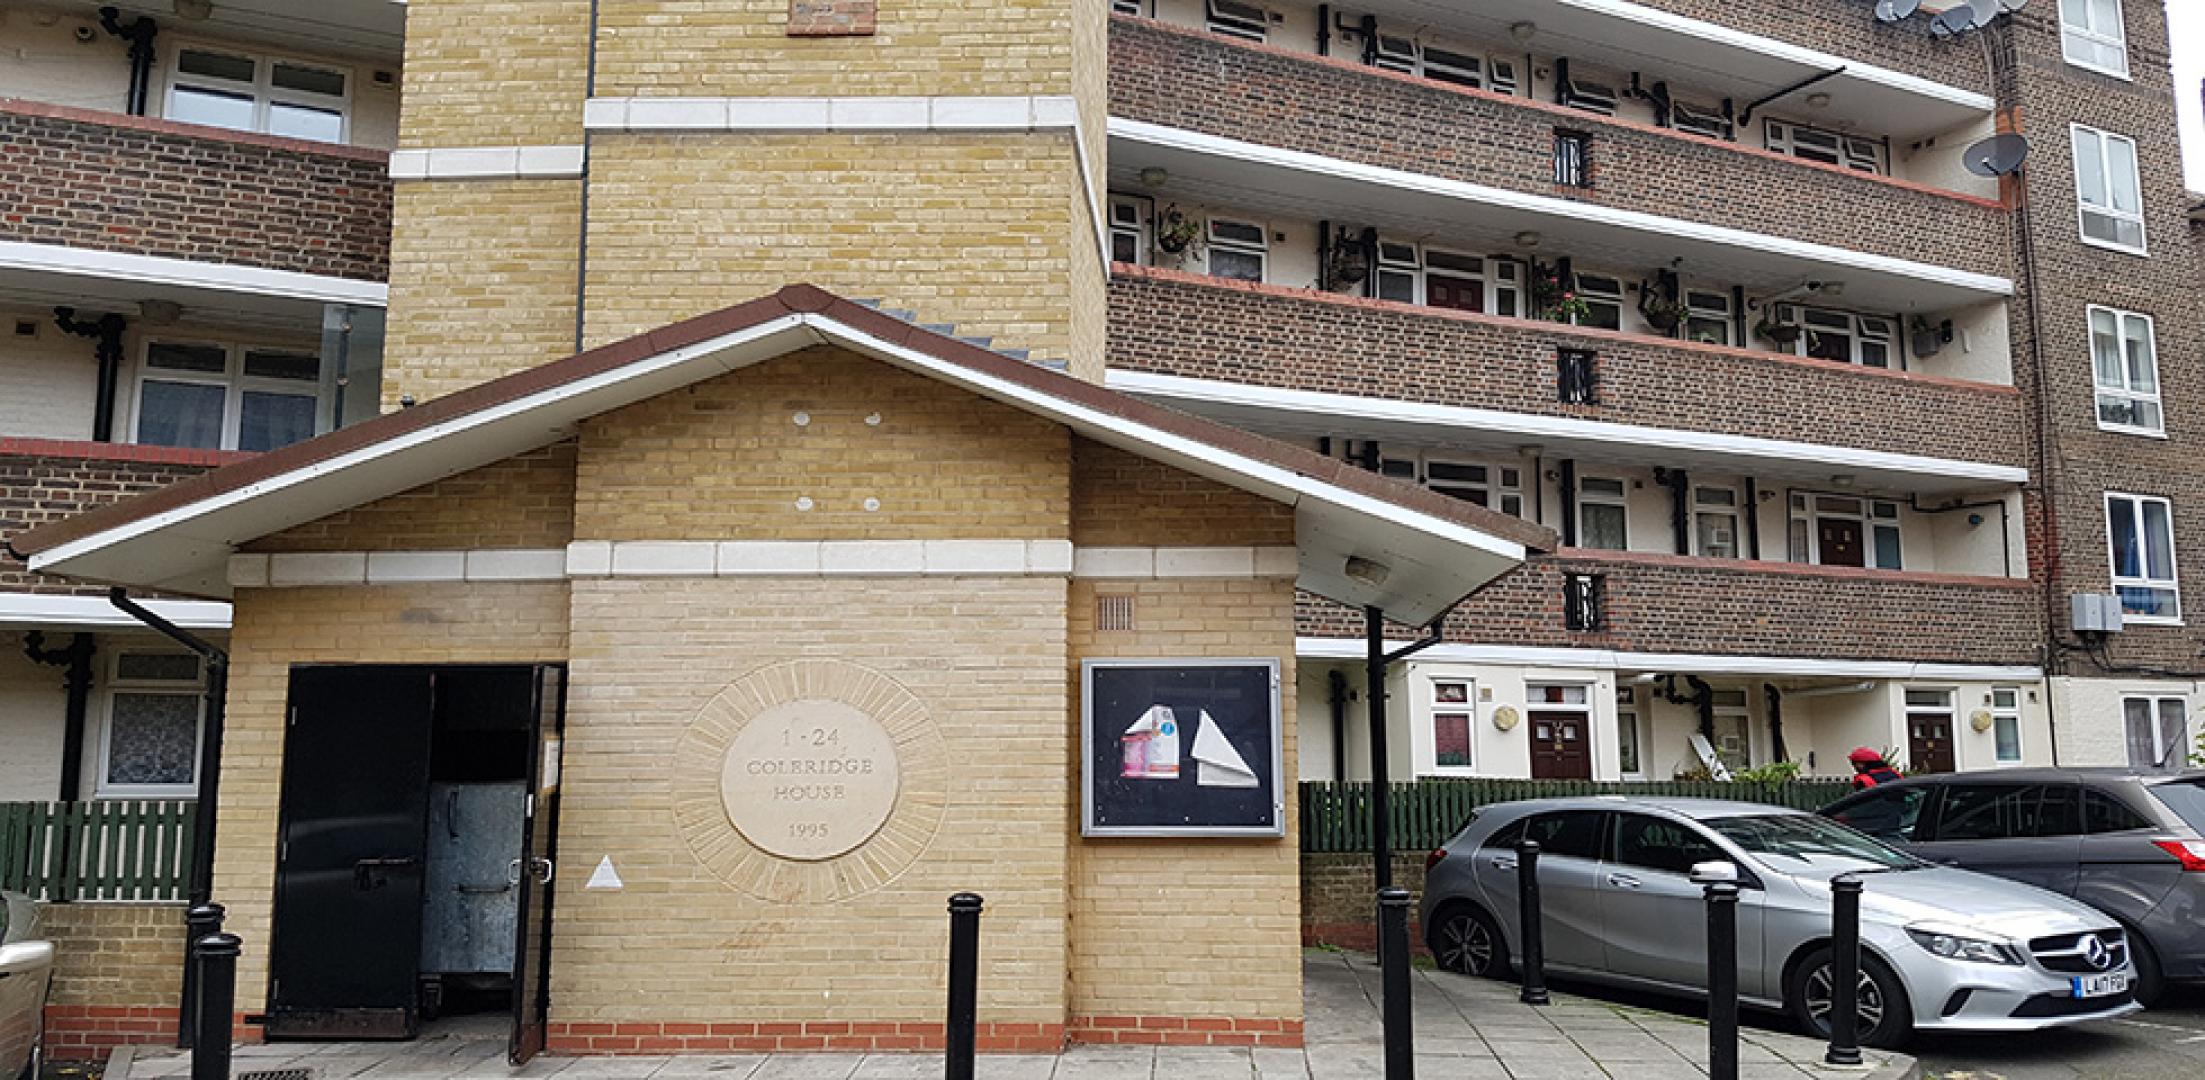 			LET , 3 Bedroom, 1 bath, 1 reception Apartment			 Browning Street , Elephant and Castle